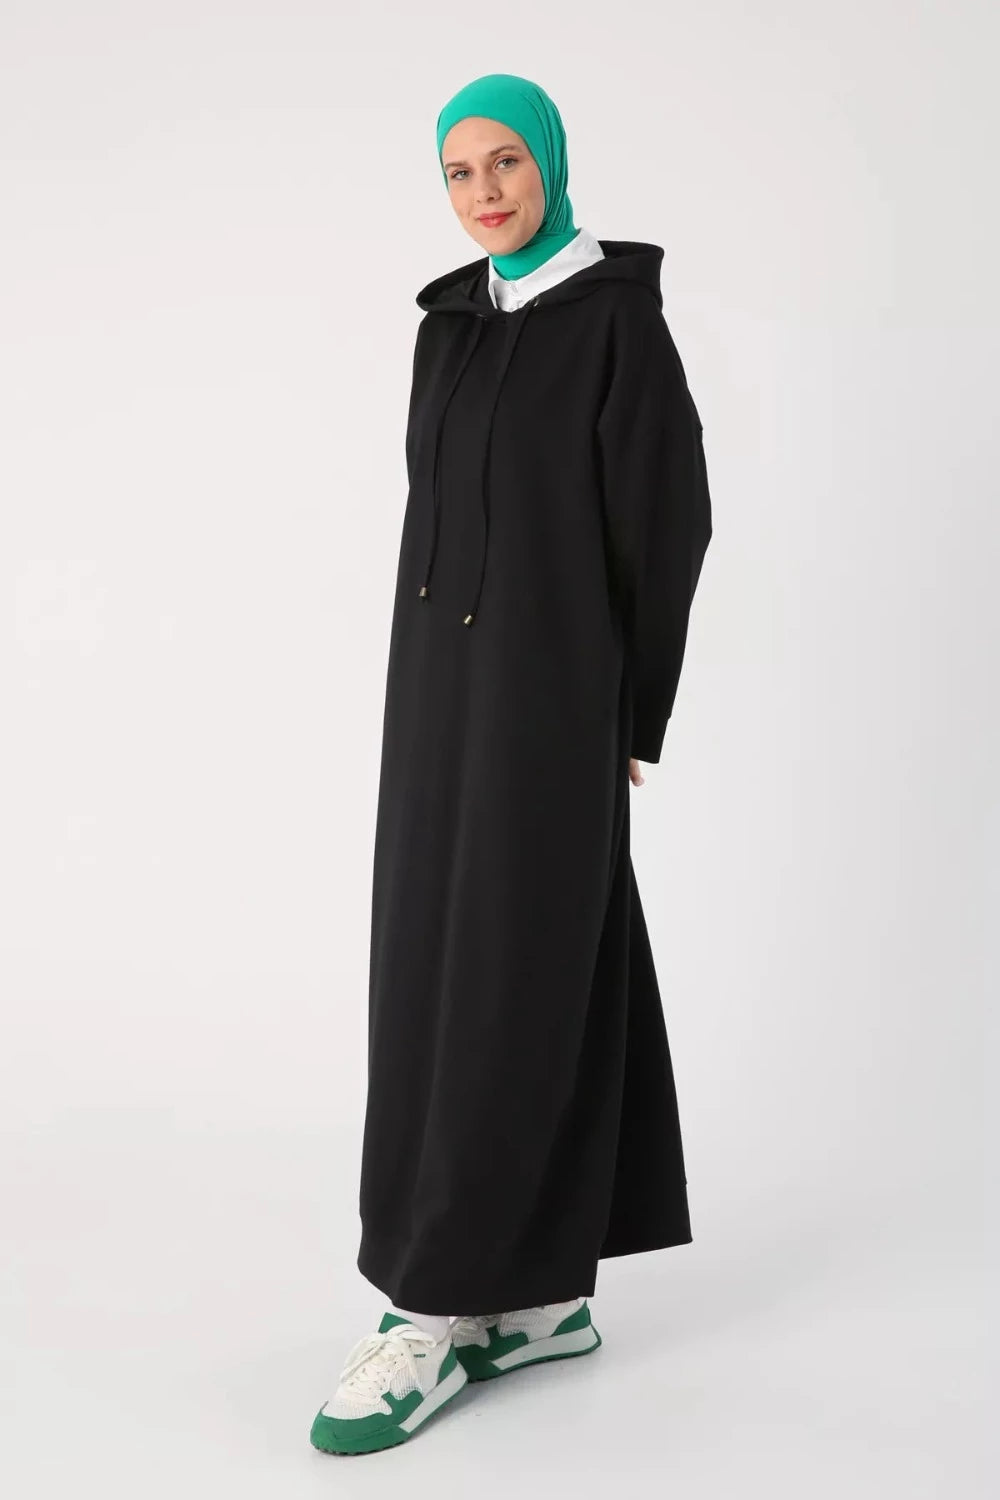 Plus Size Modest Hooded Knitted Dress 